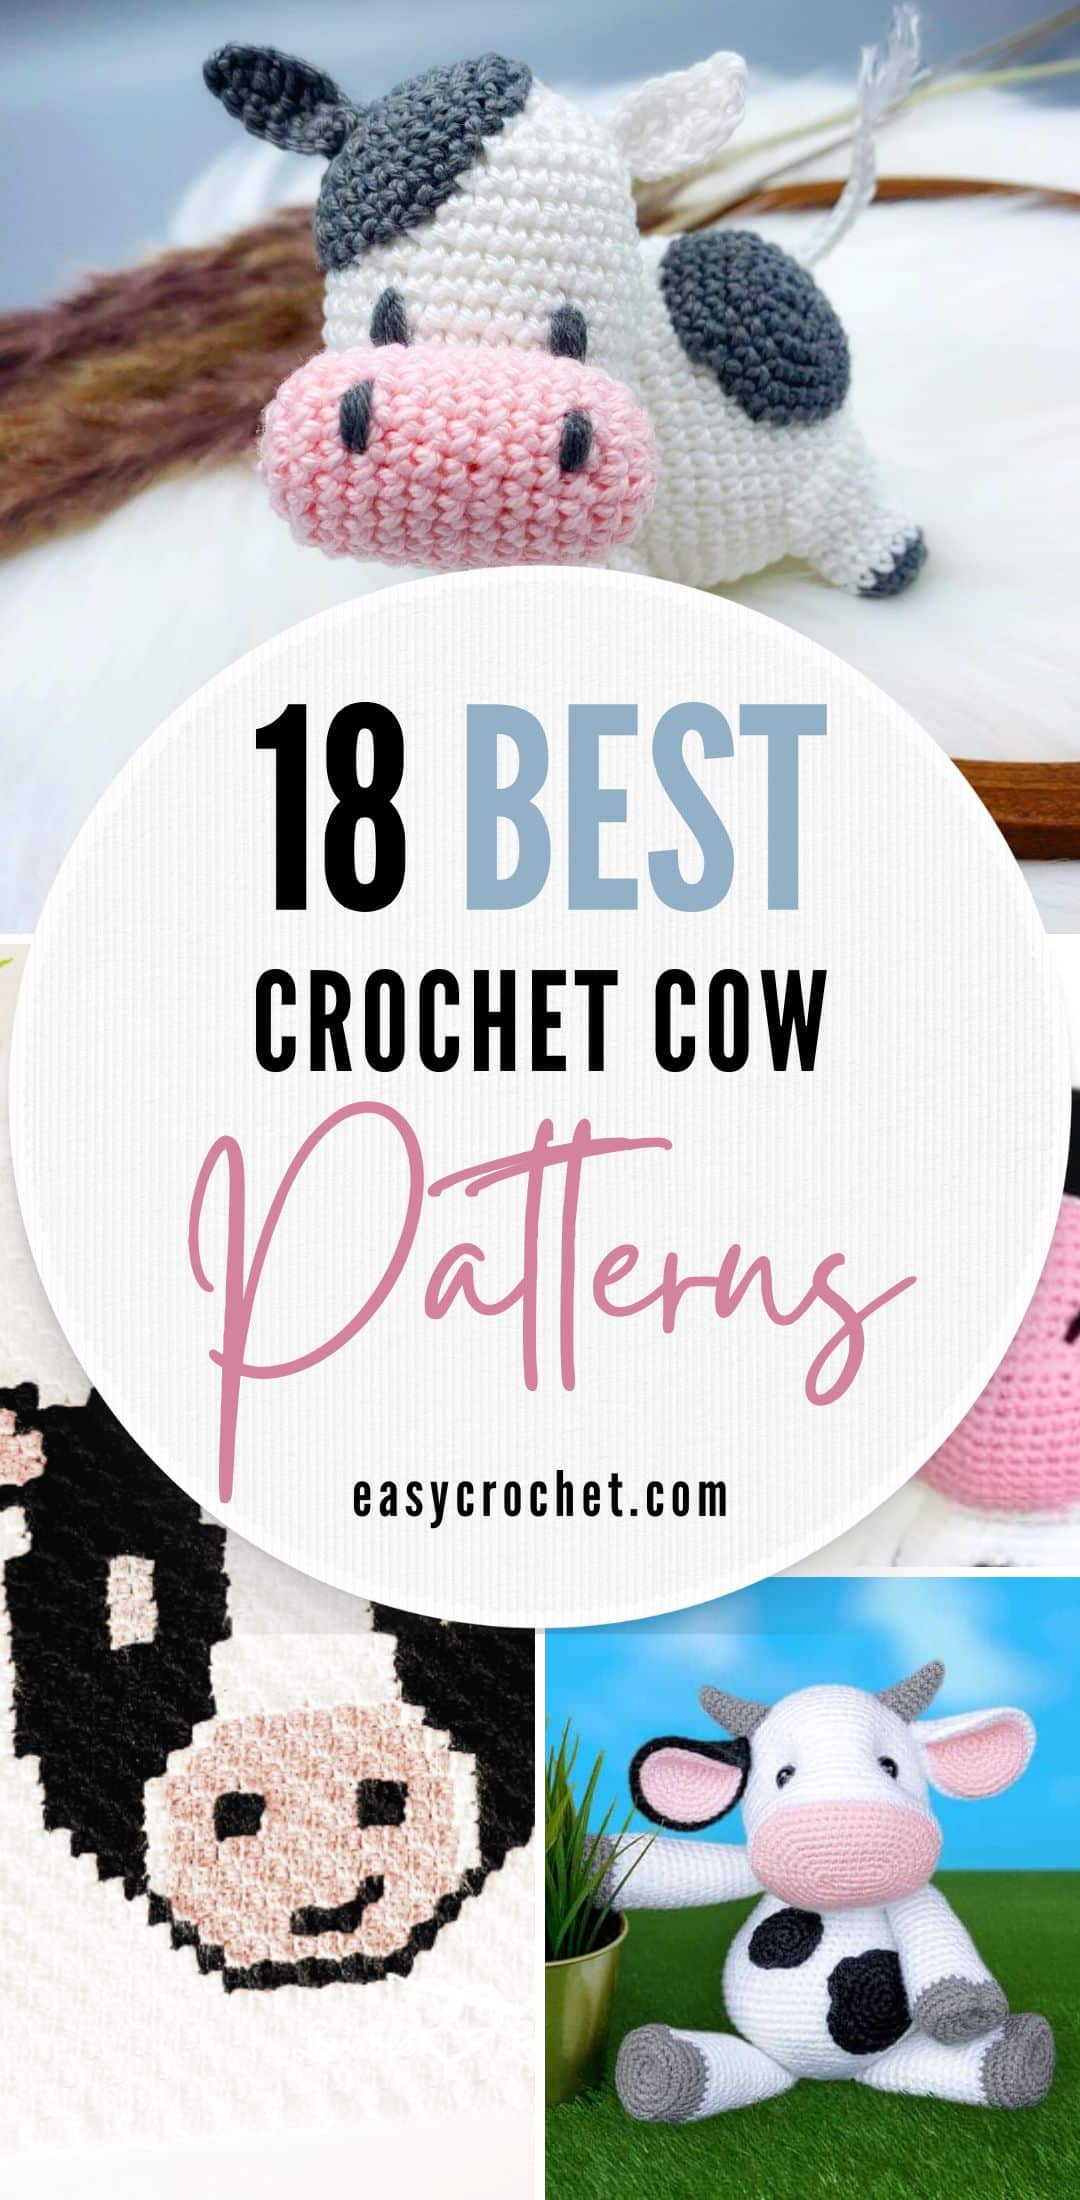 an image showing a Collection of Crochet Cow Patterns that are all free crochet patterns